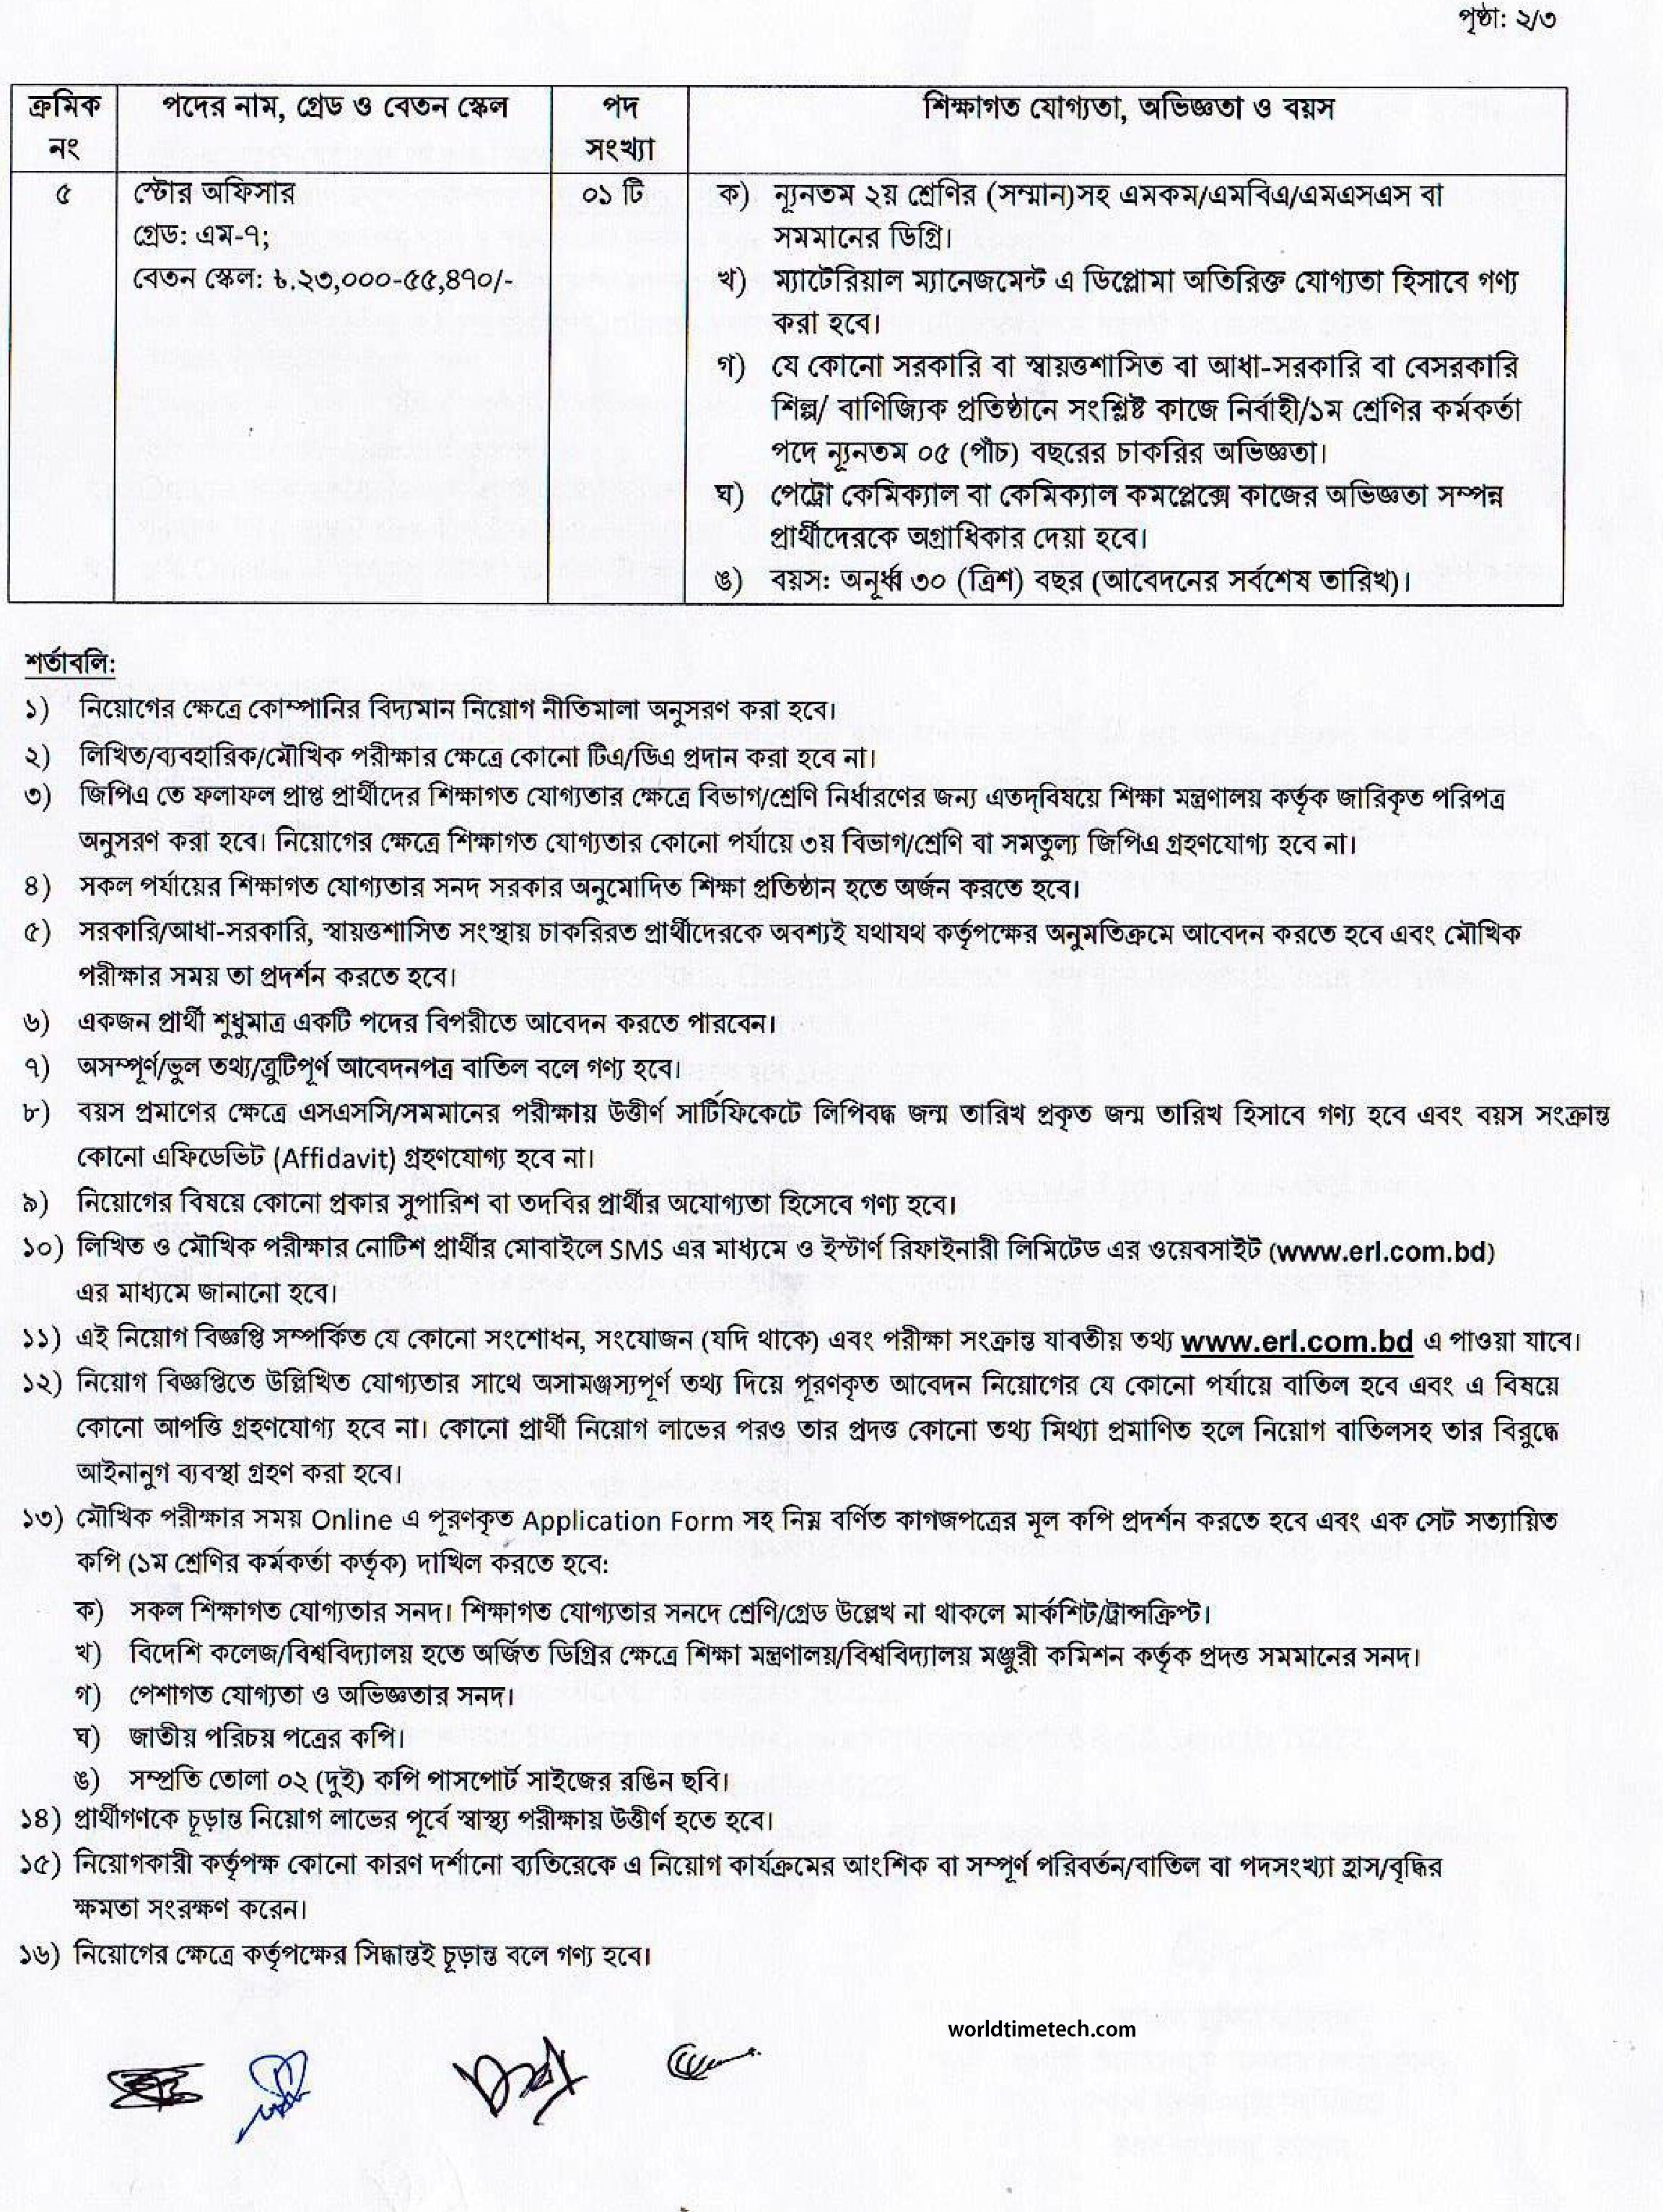 eastern-refinery-limited-job-circular-2022-part-2